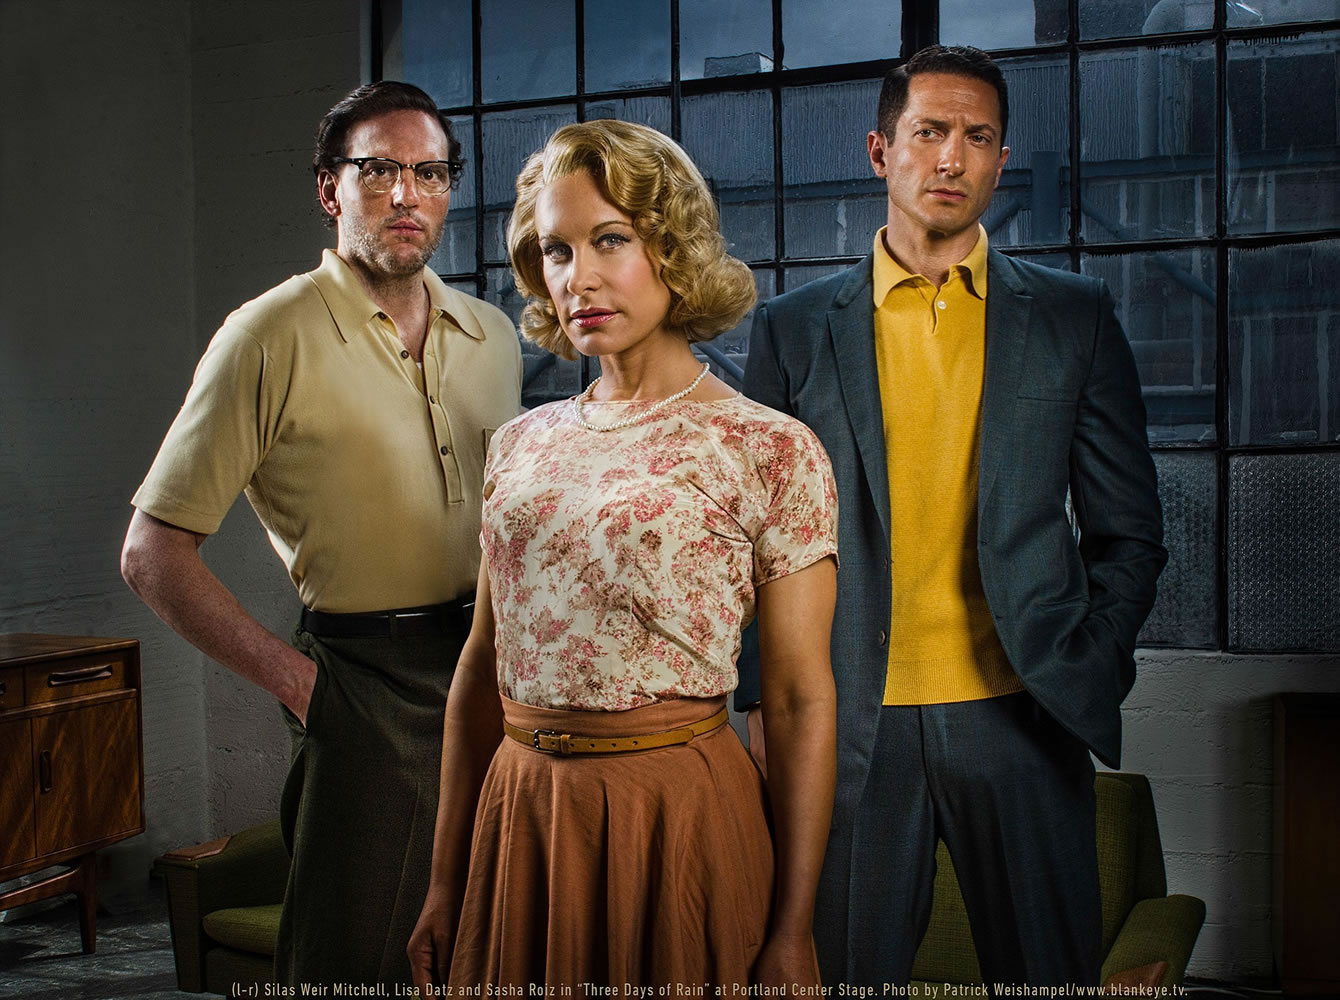 Portland Center Stage presents &quot;Three Days of Rain,&quot; staring Silas Weir Mitchell and Sasha Roiz of &quot;Grimm,&quot; and Lisa Datz, May 17-June 21, 2015.